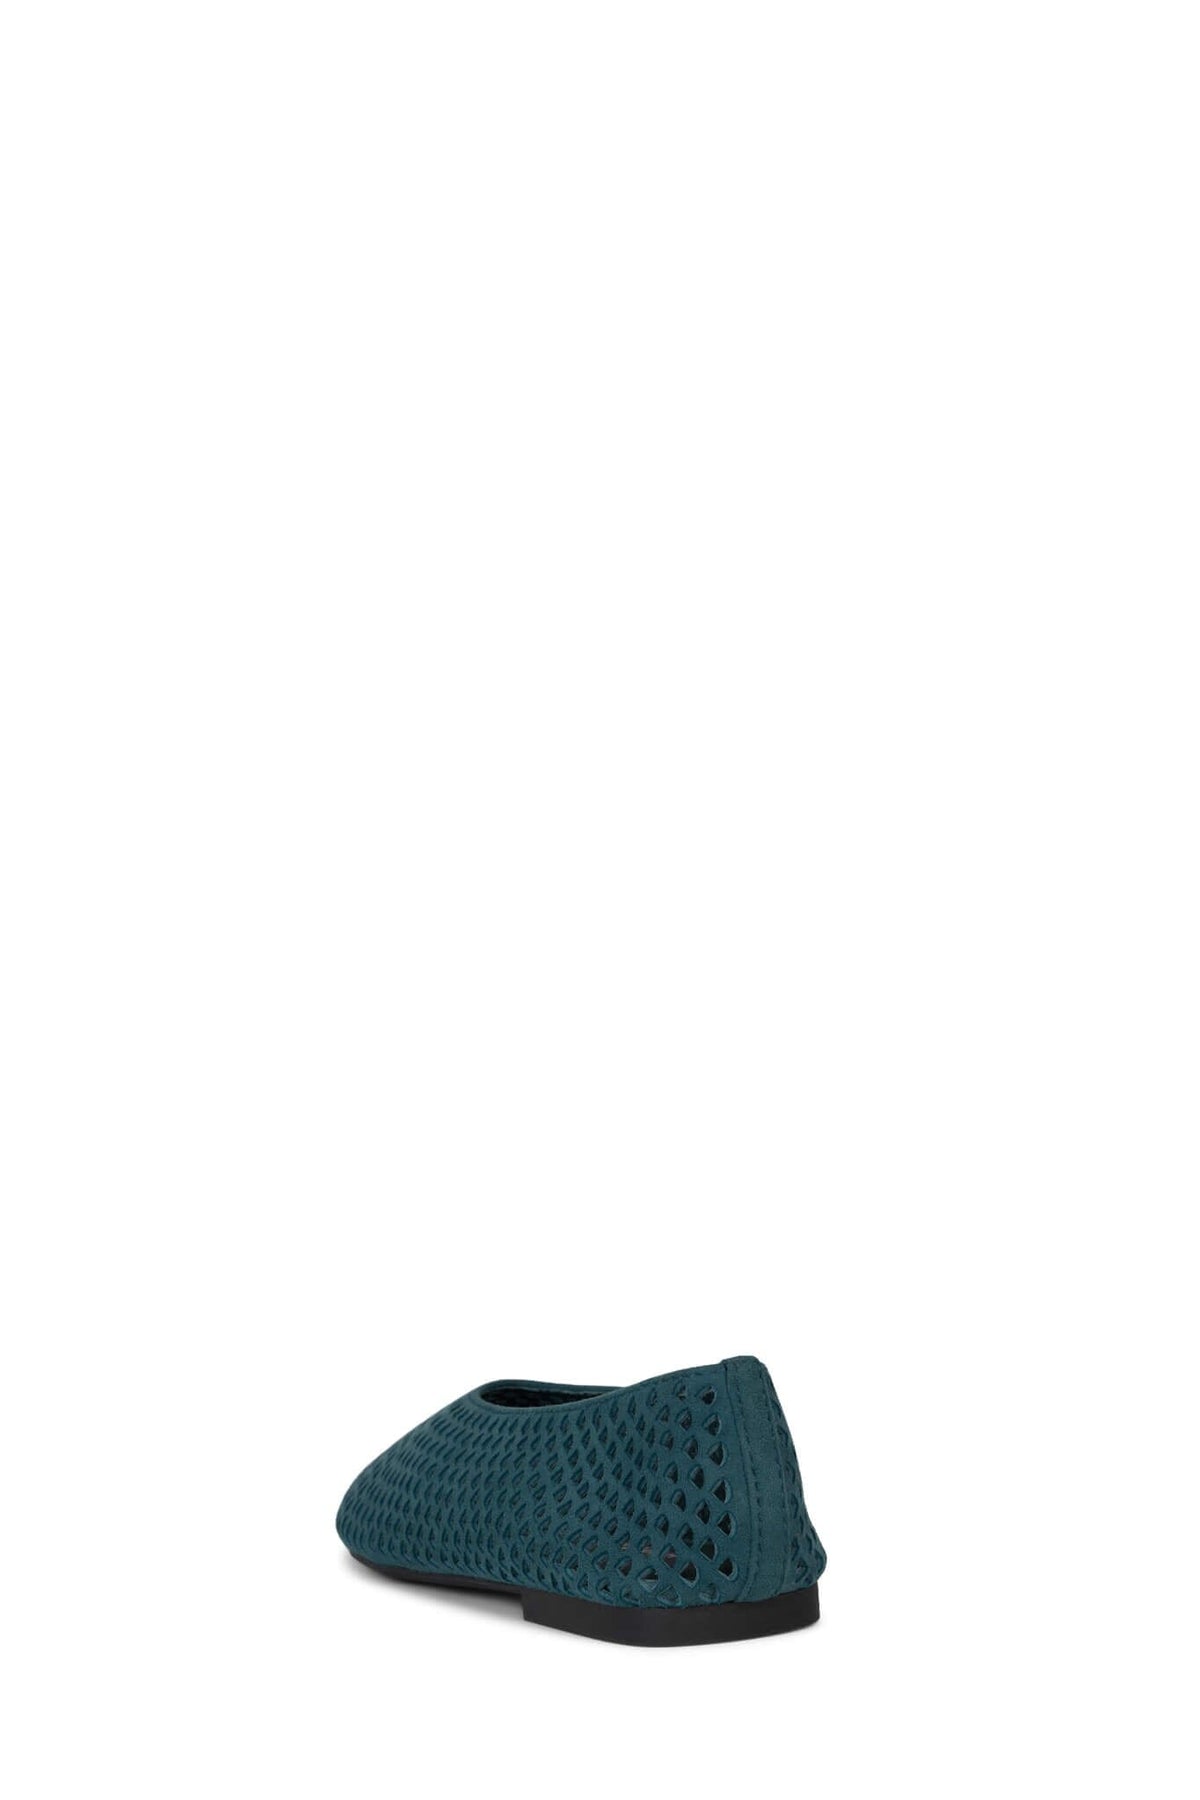 Jeffrey Campbell Flats Teal Suede